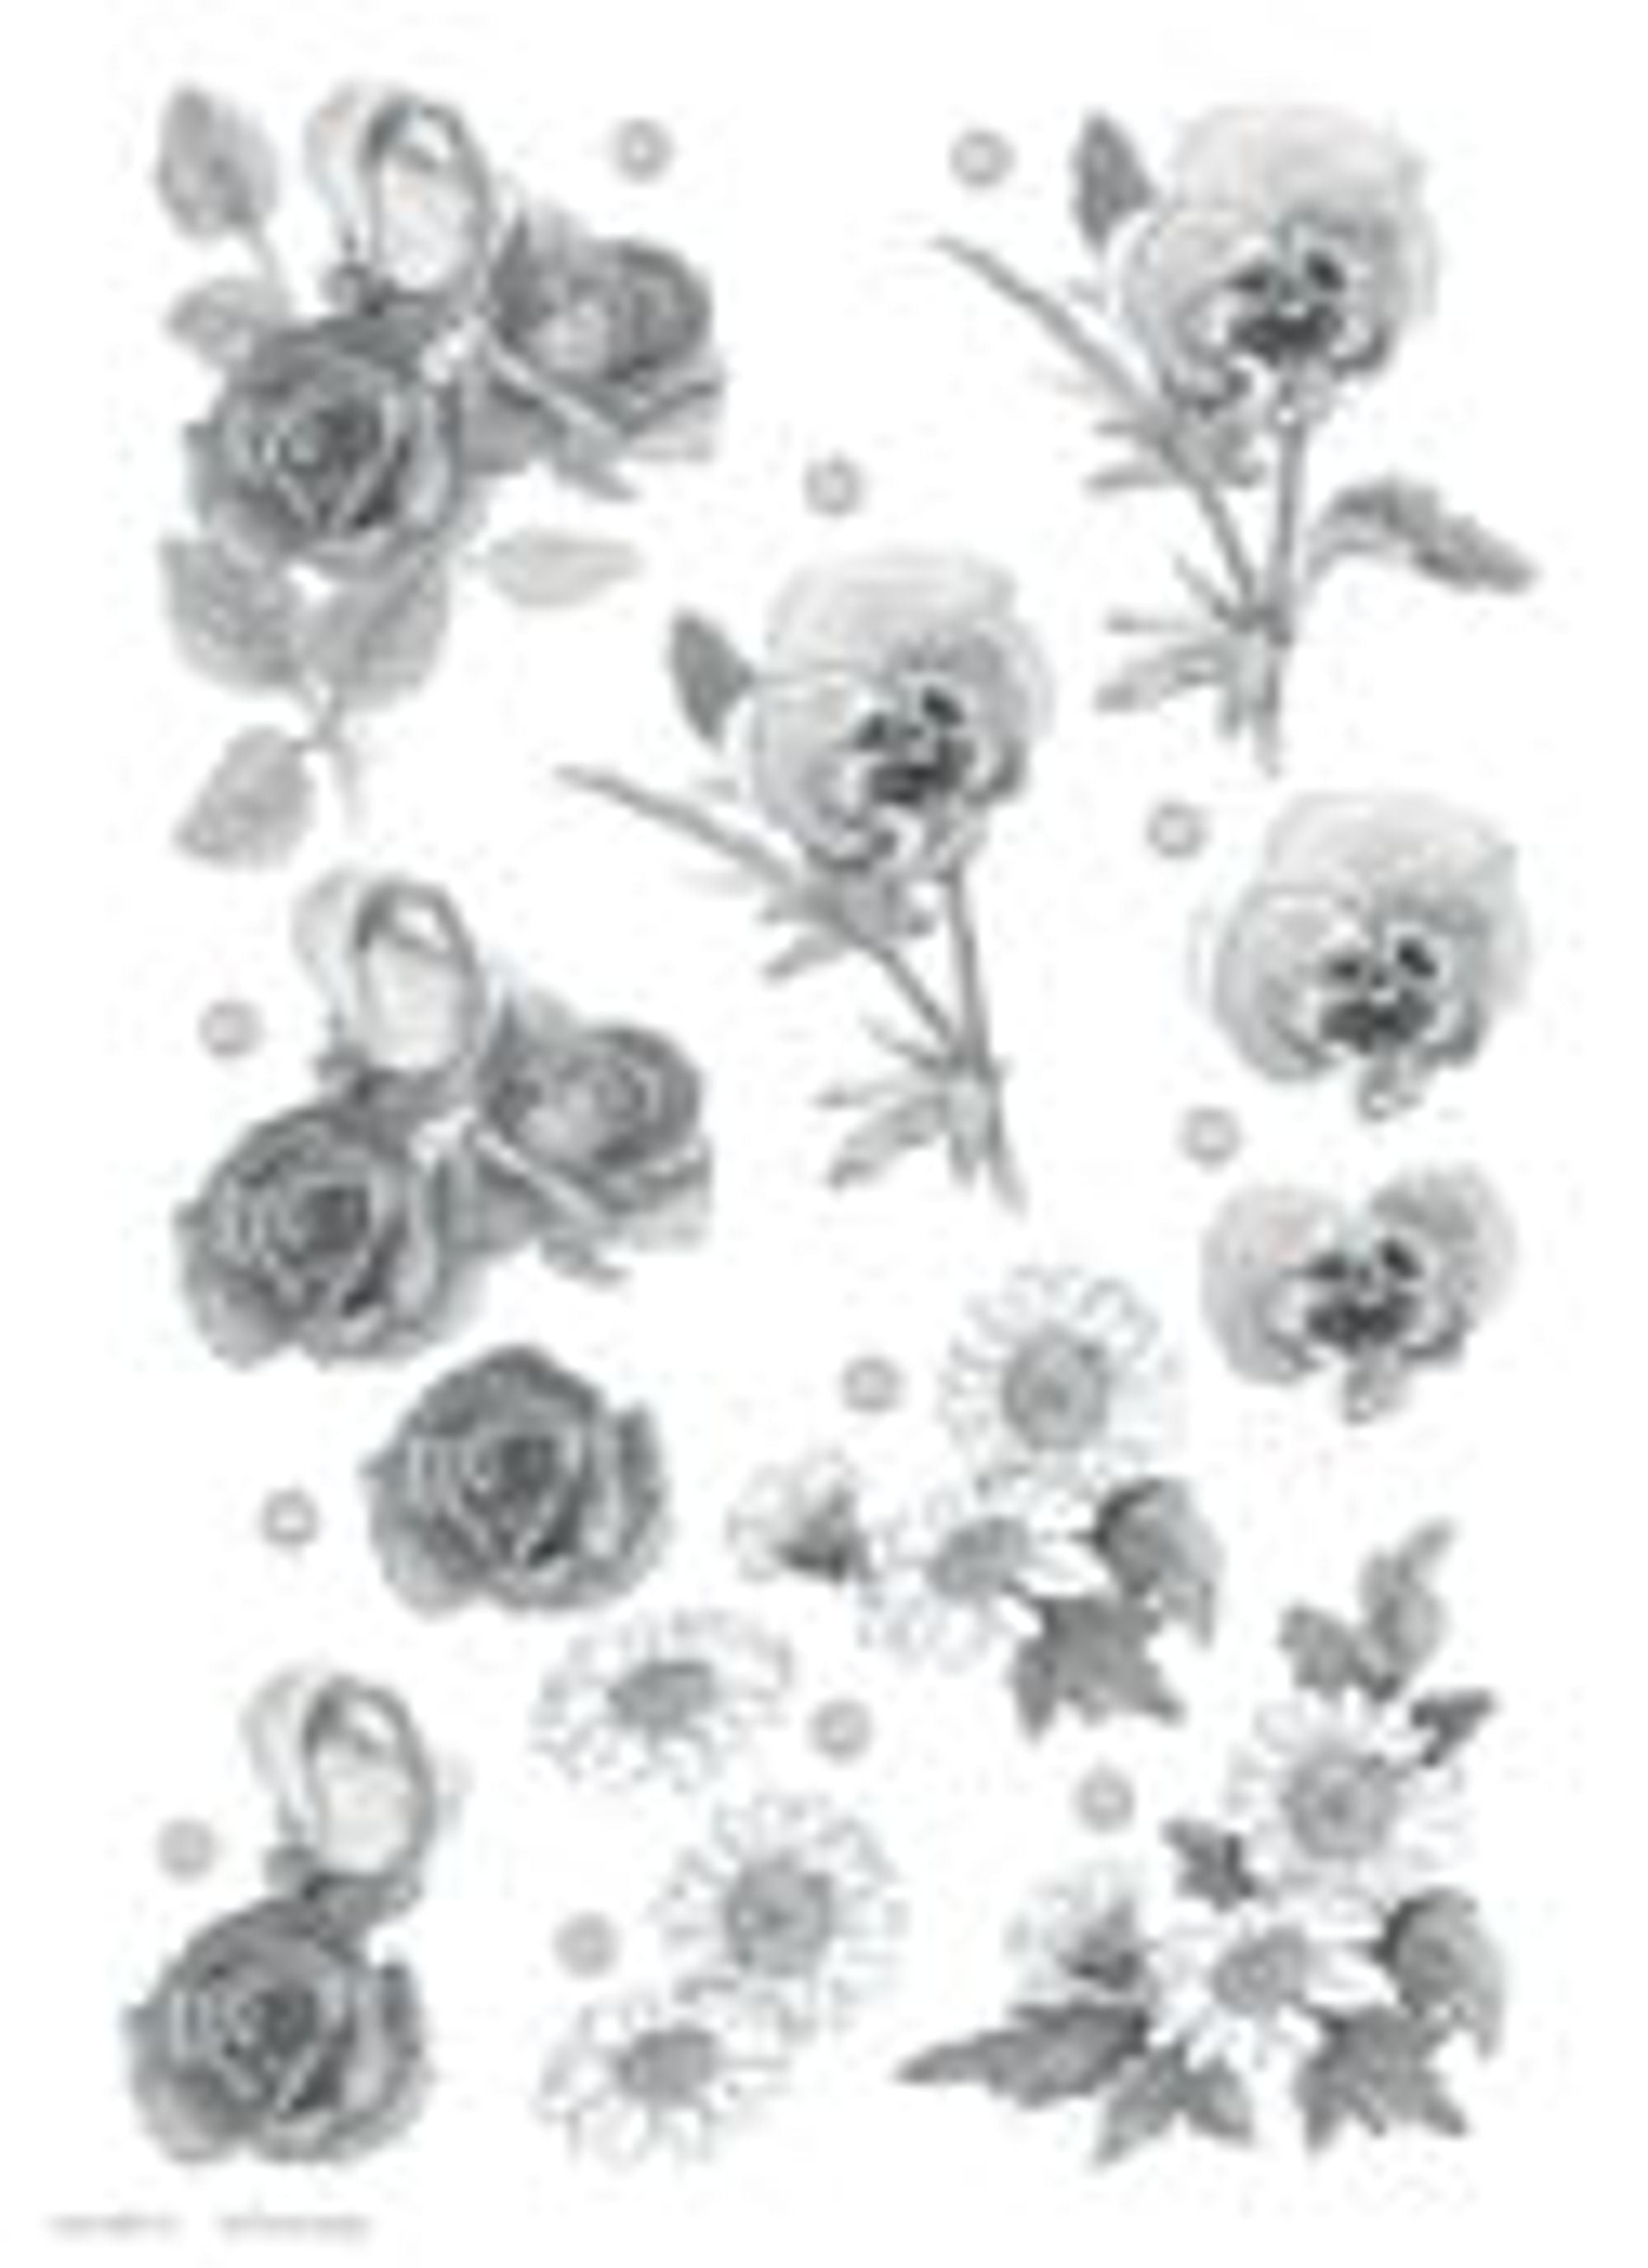 Craft UK Floral -Rose/Daisy/Pansy - Silver